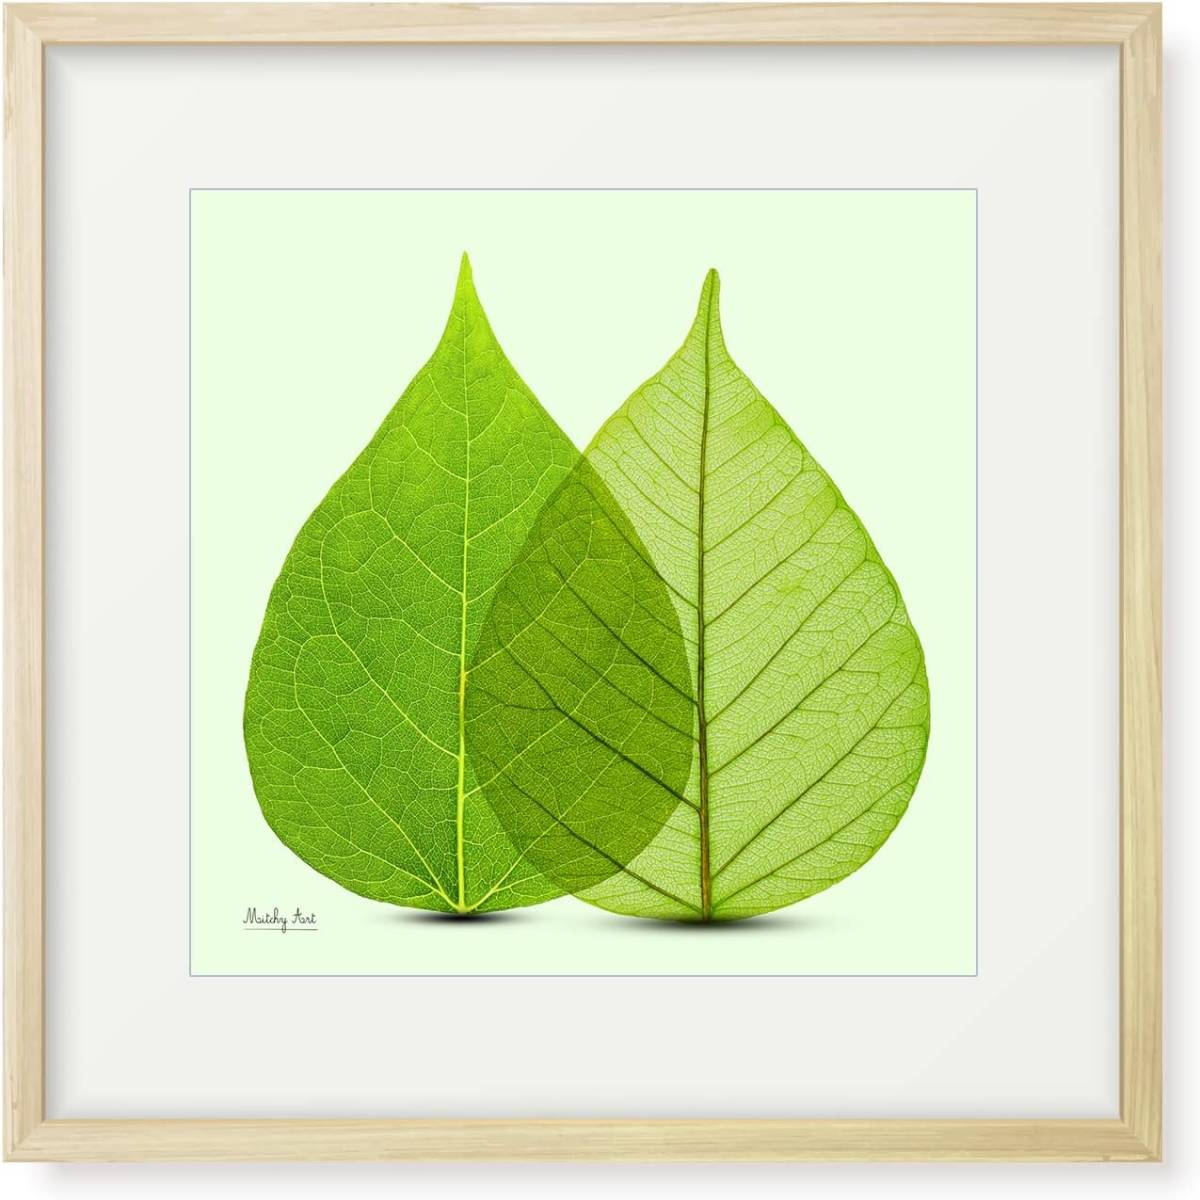 Leaf Twisting Painting, Picture, Framed, Framed, Interior, Plant, Houseplant, Leaf, Art, Wall Hanging, Modern Art, New, Housewarming, Opening, Present, Artwork, Painting, others